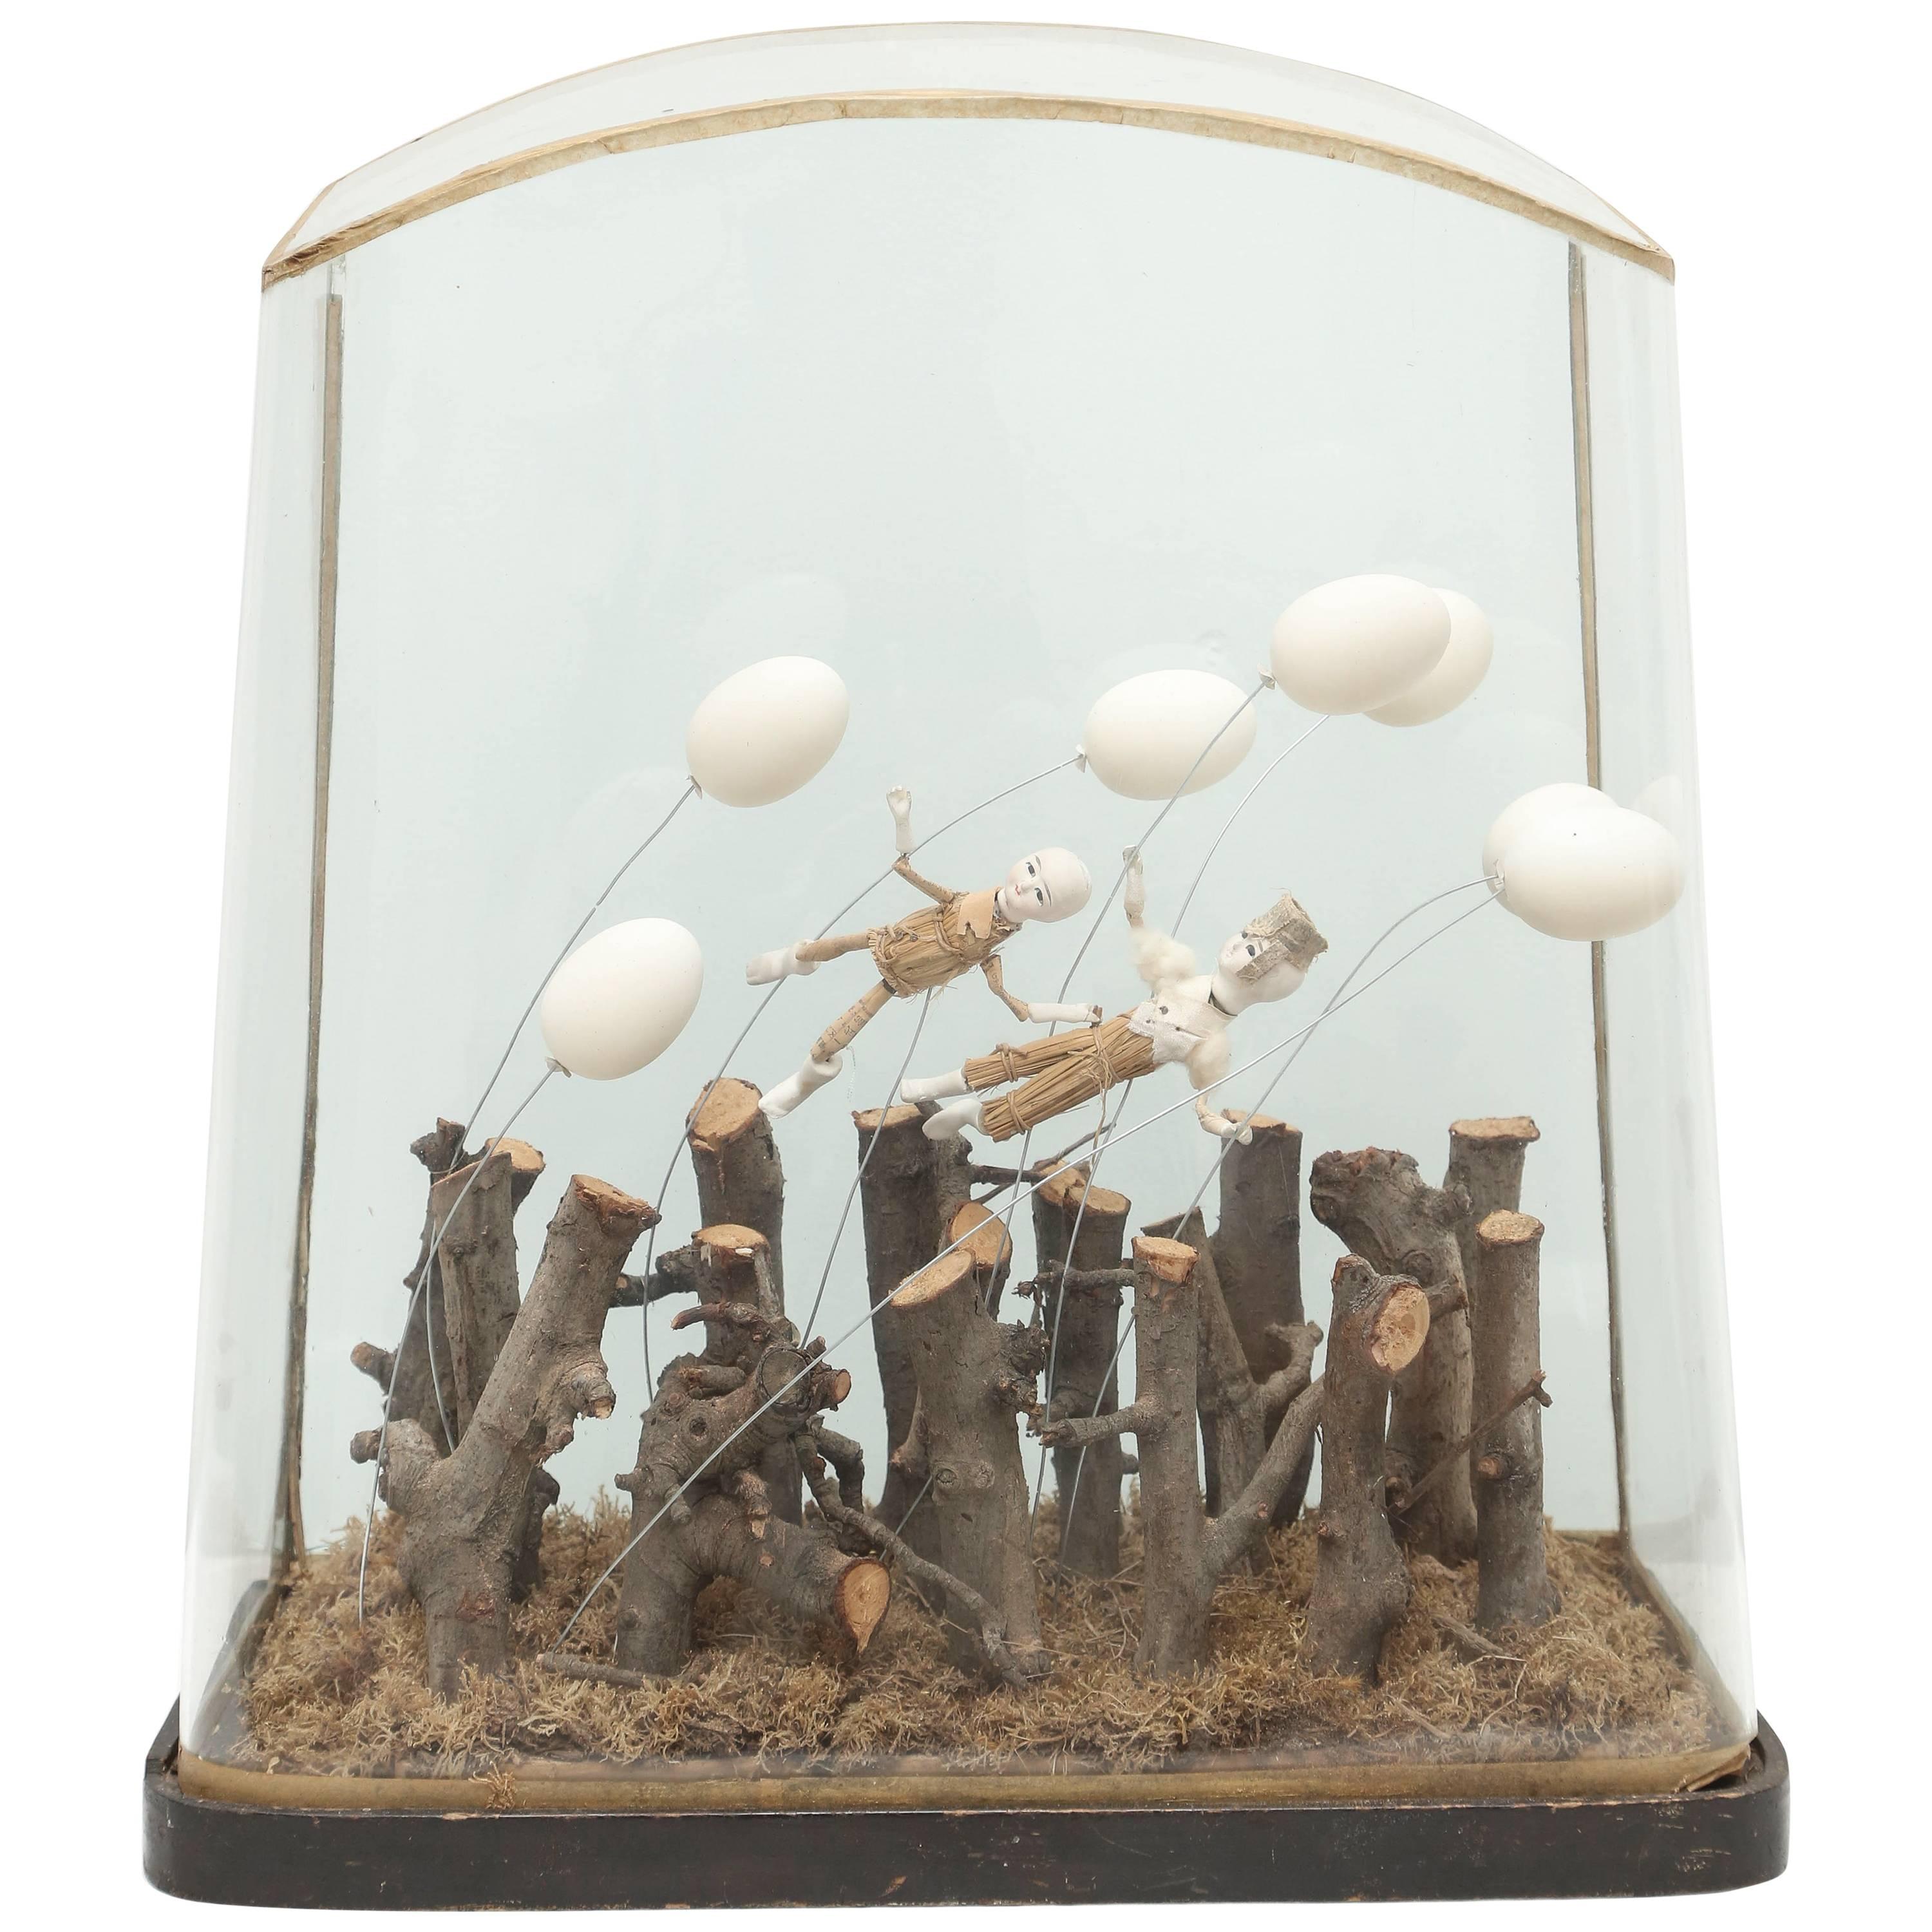 Whimsical Fantasy Tabletop Diorama For Sale